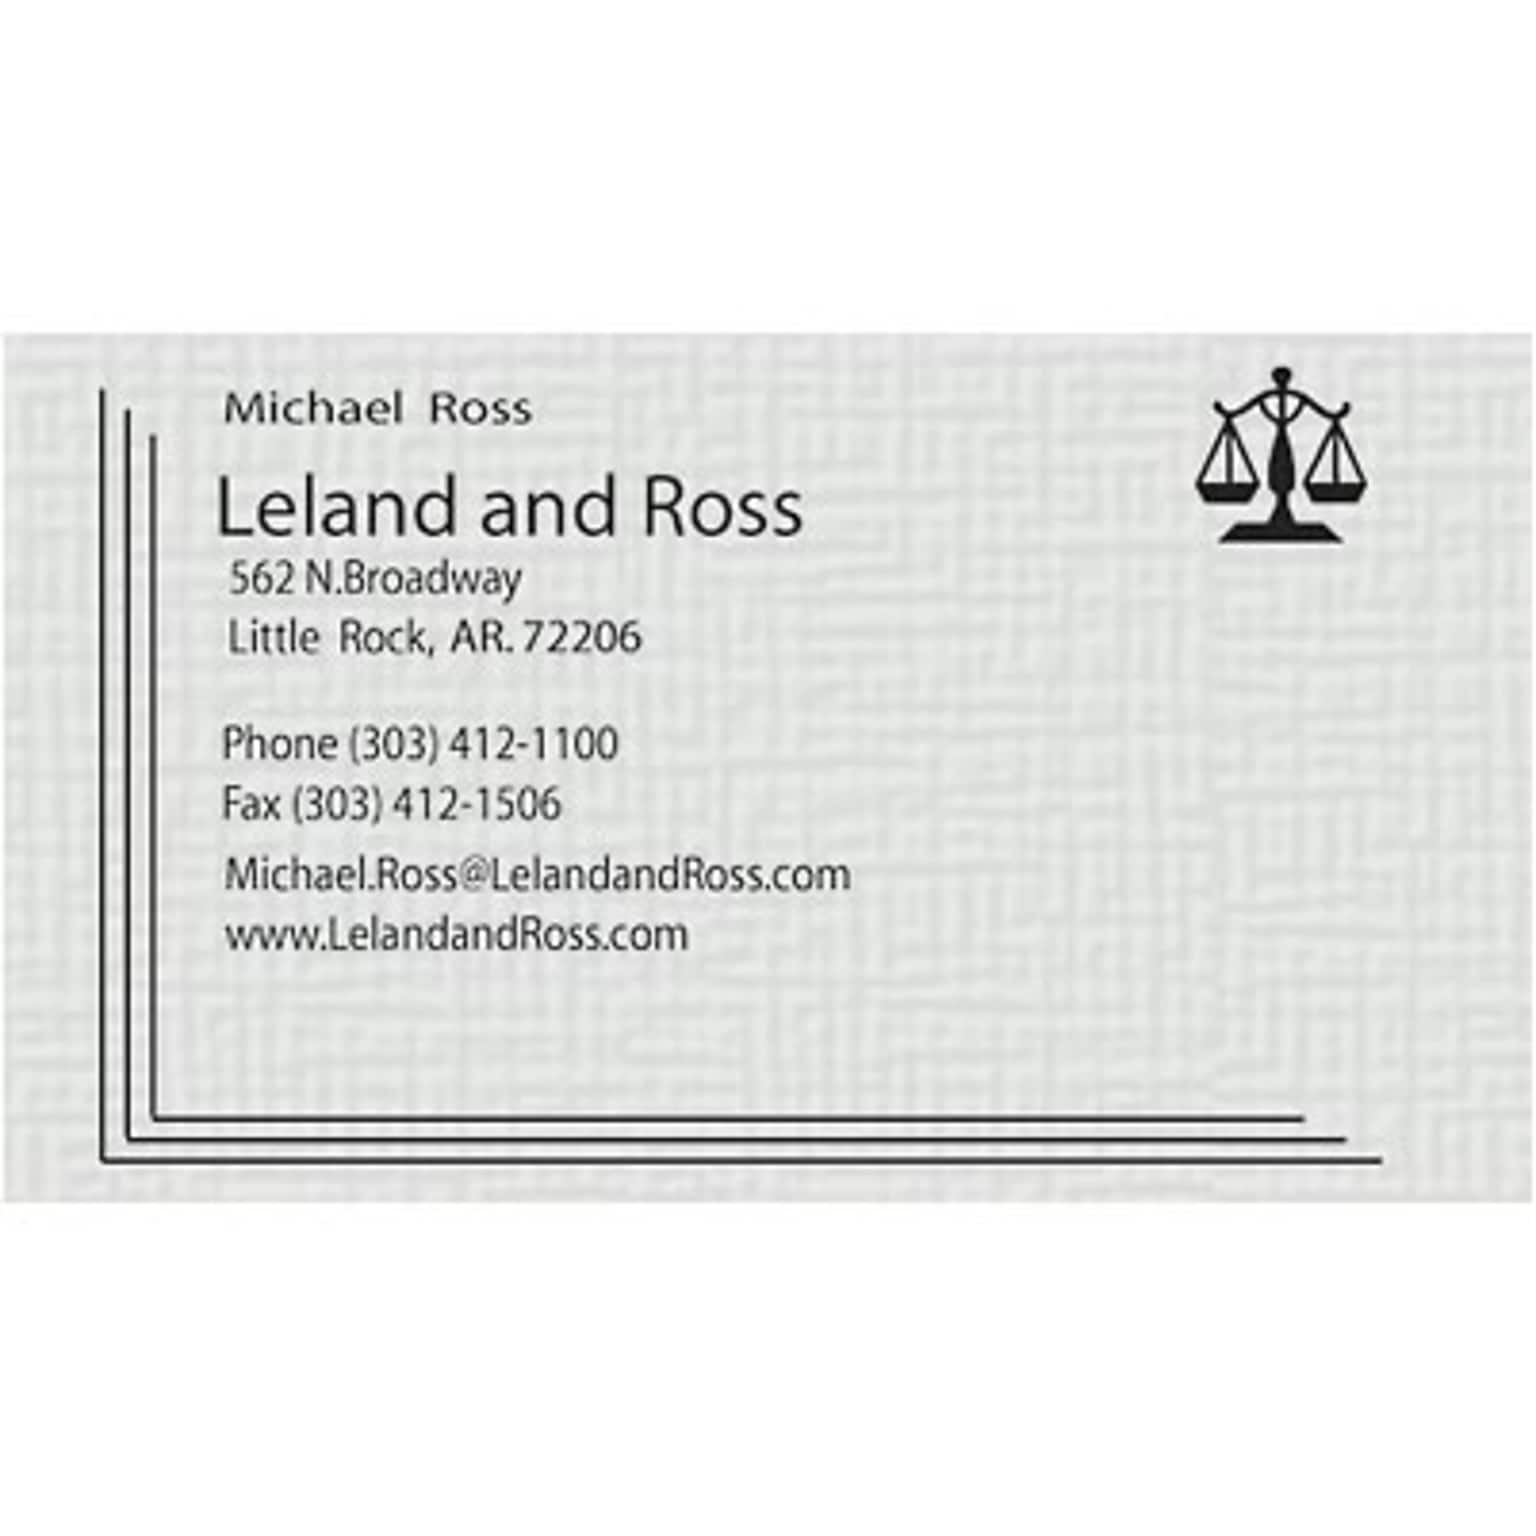 Custom 1-2 Color Business Cards, Gray Index 110#, Raised Print, 1 Standard Ink, 1-Sided, 250/PK